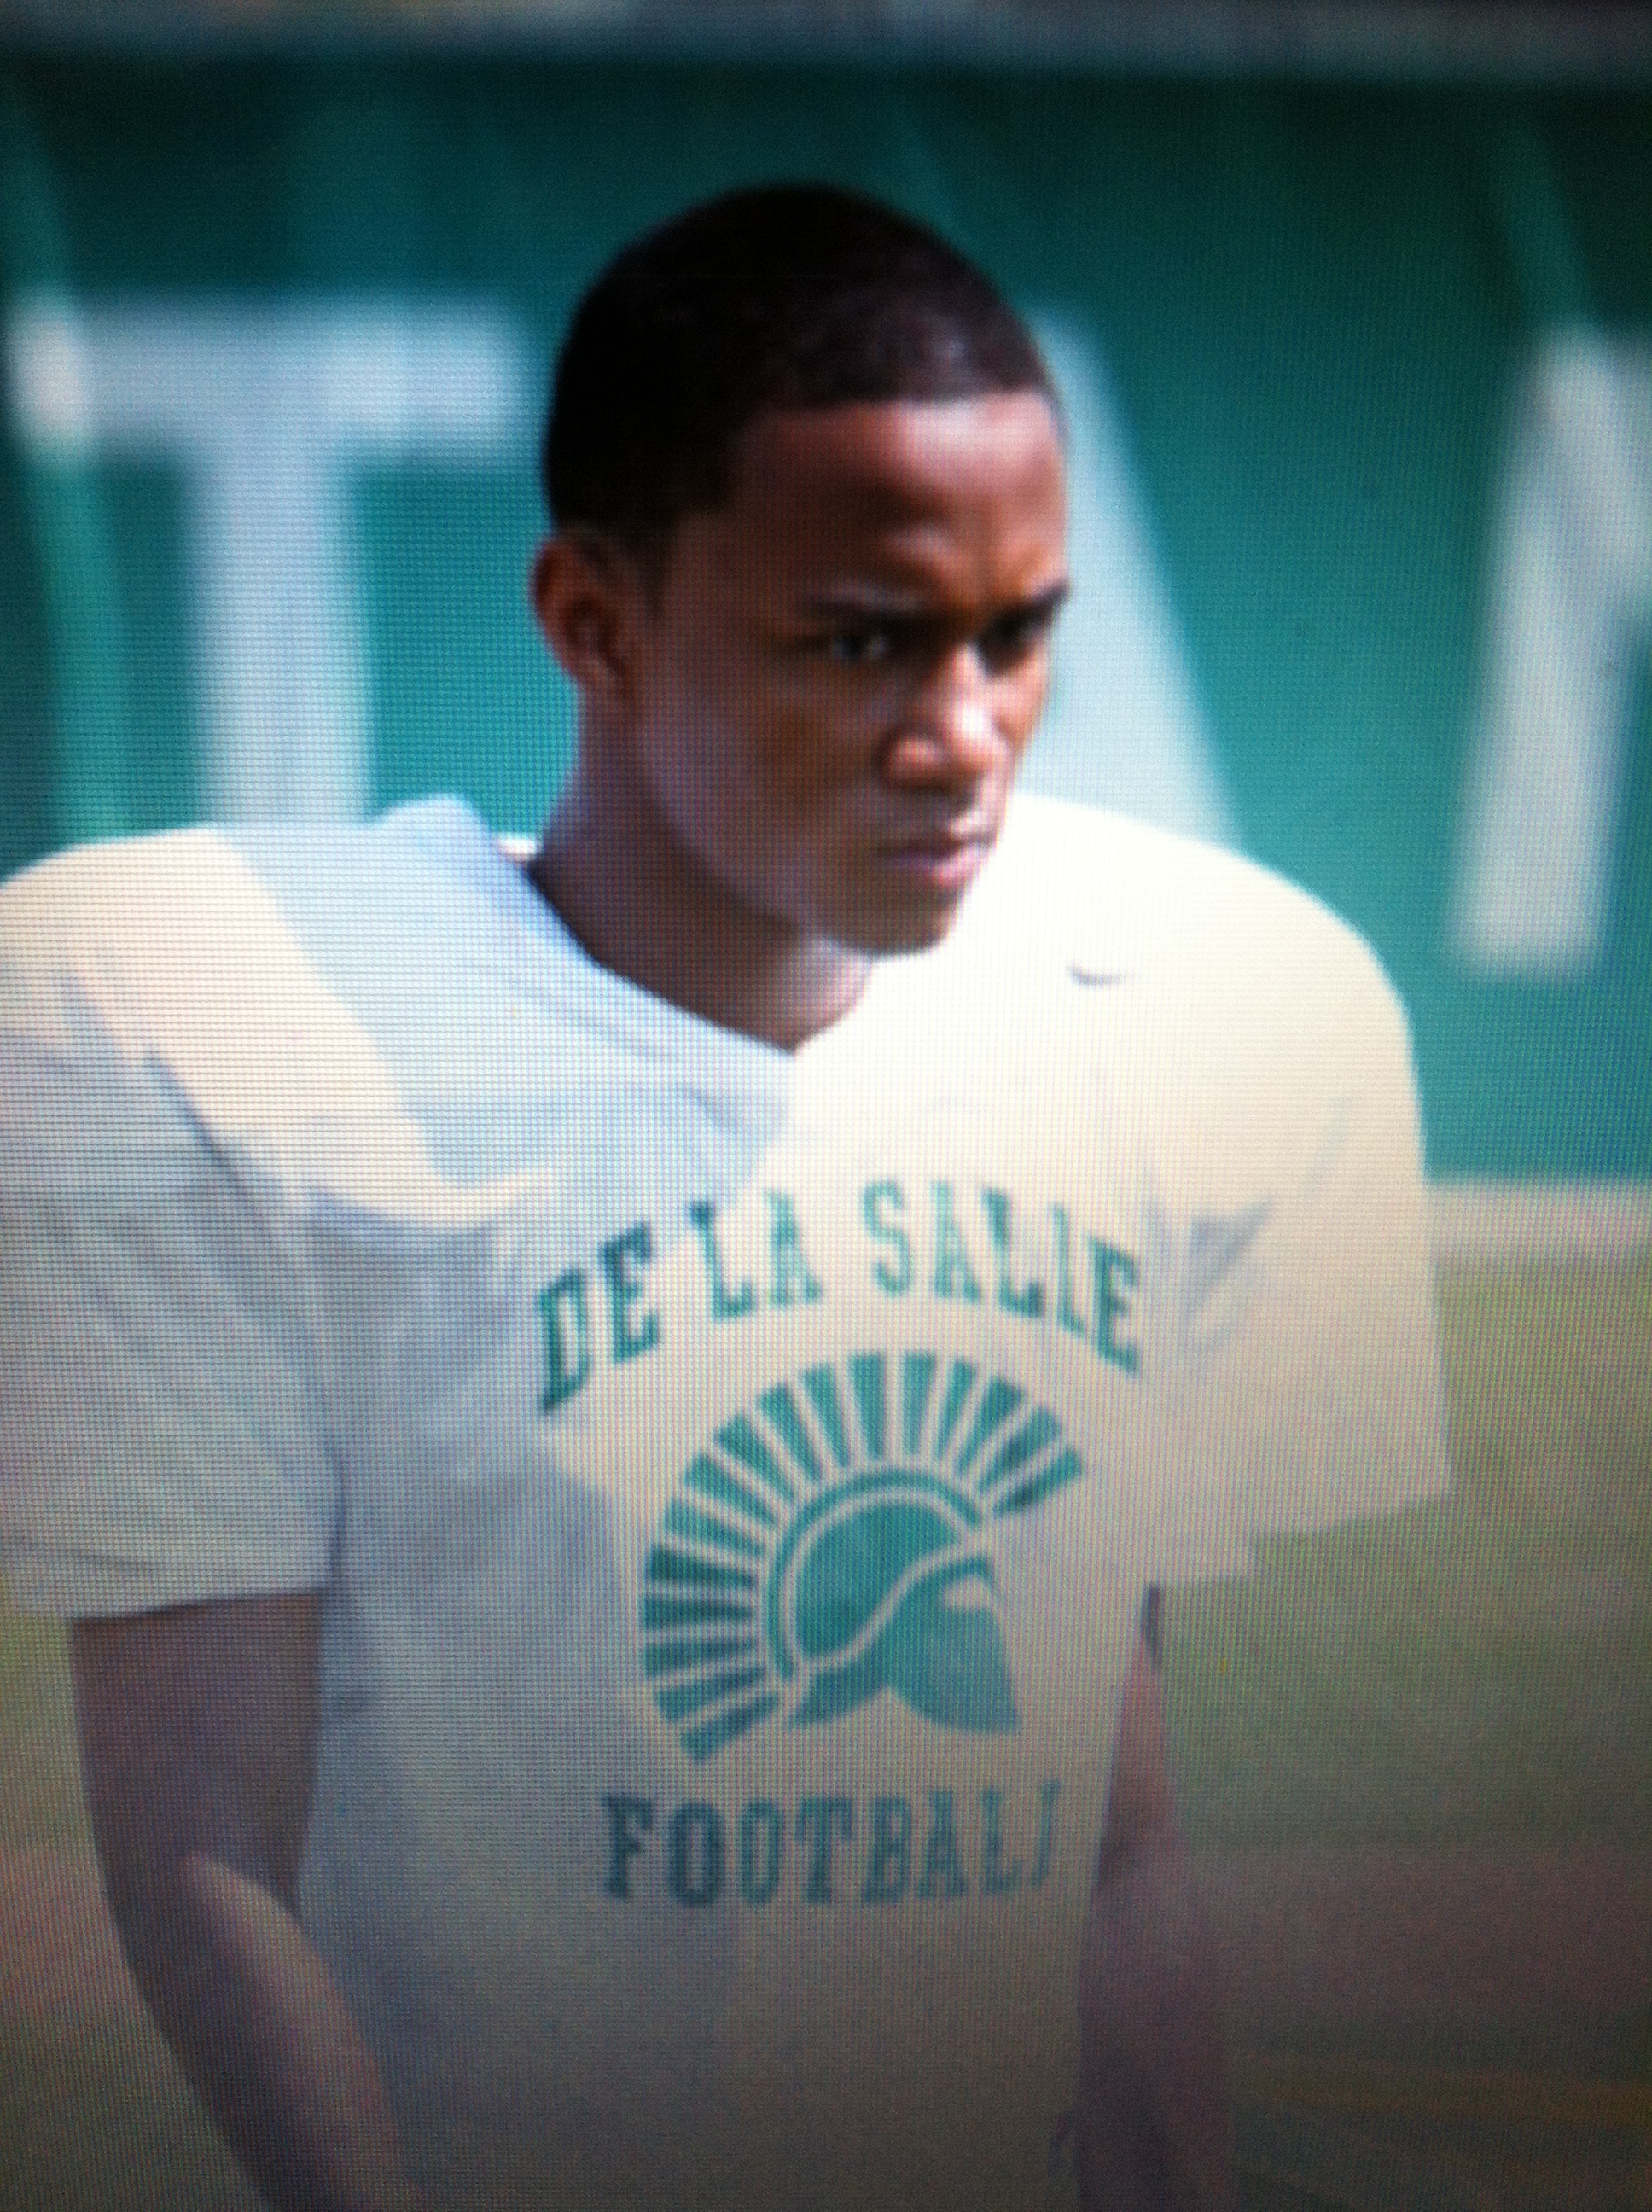 When The Game Stands Tall On set football practice